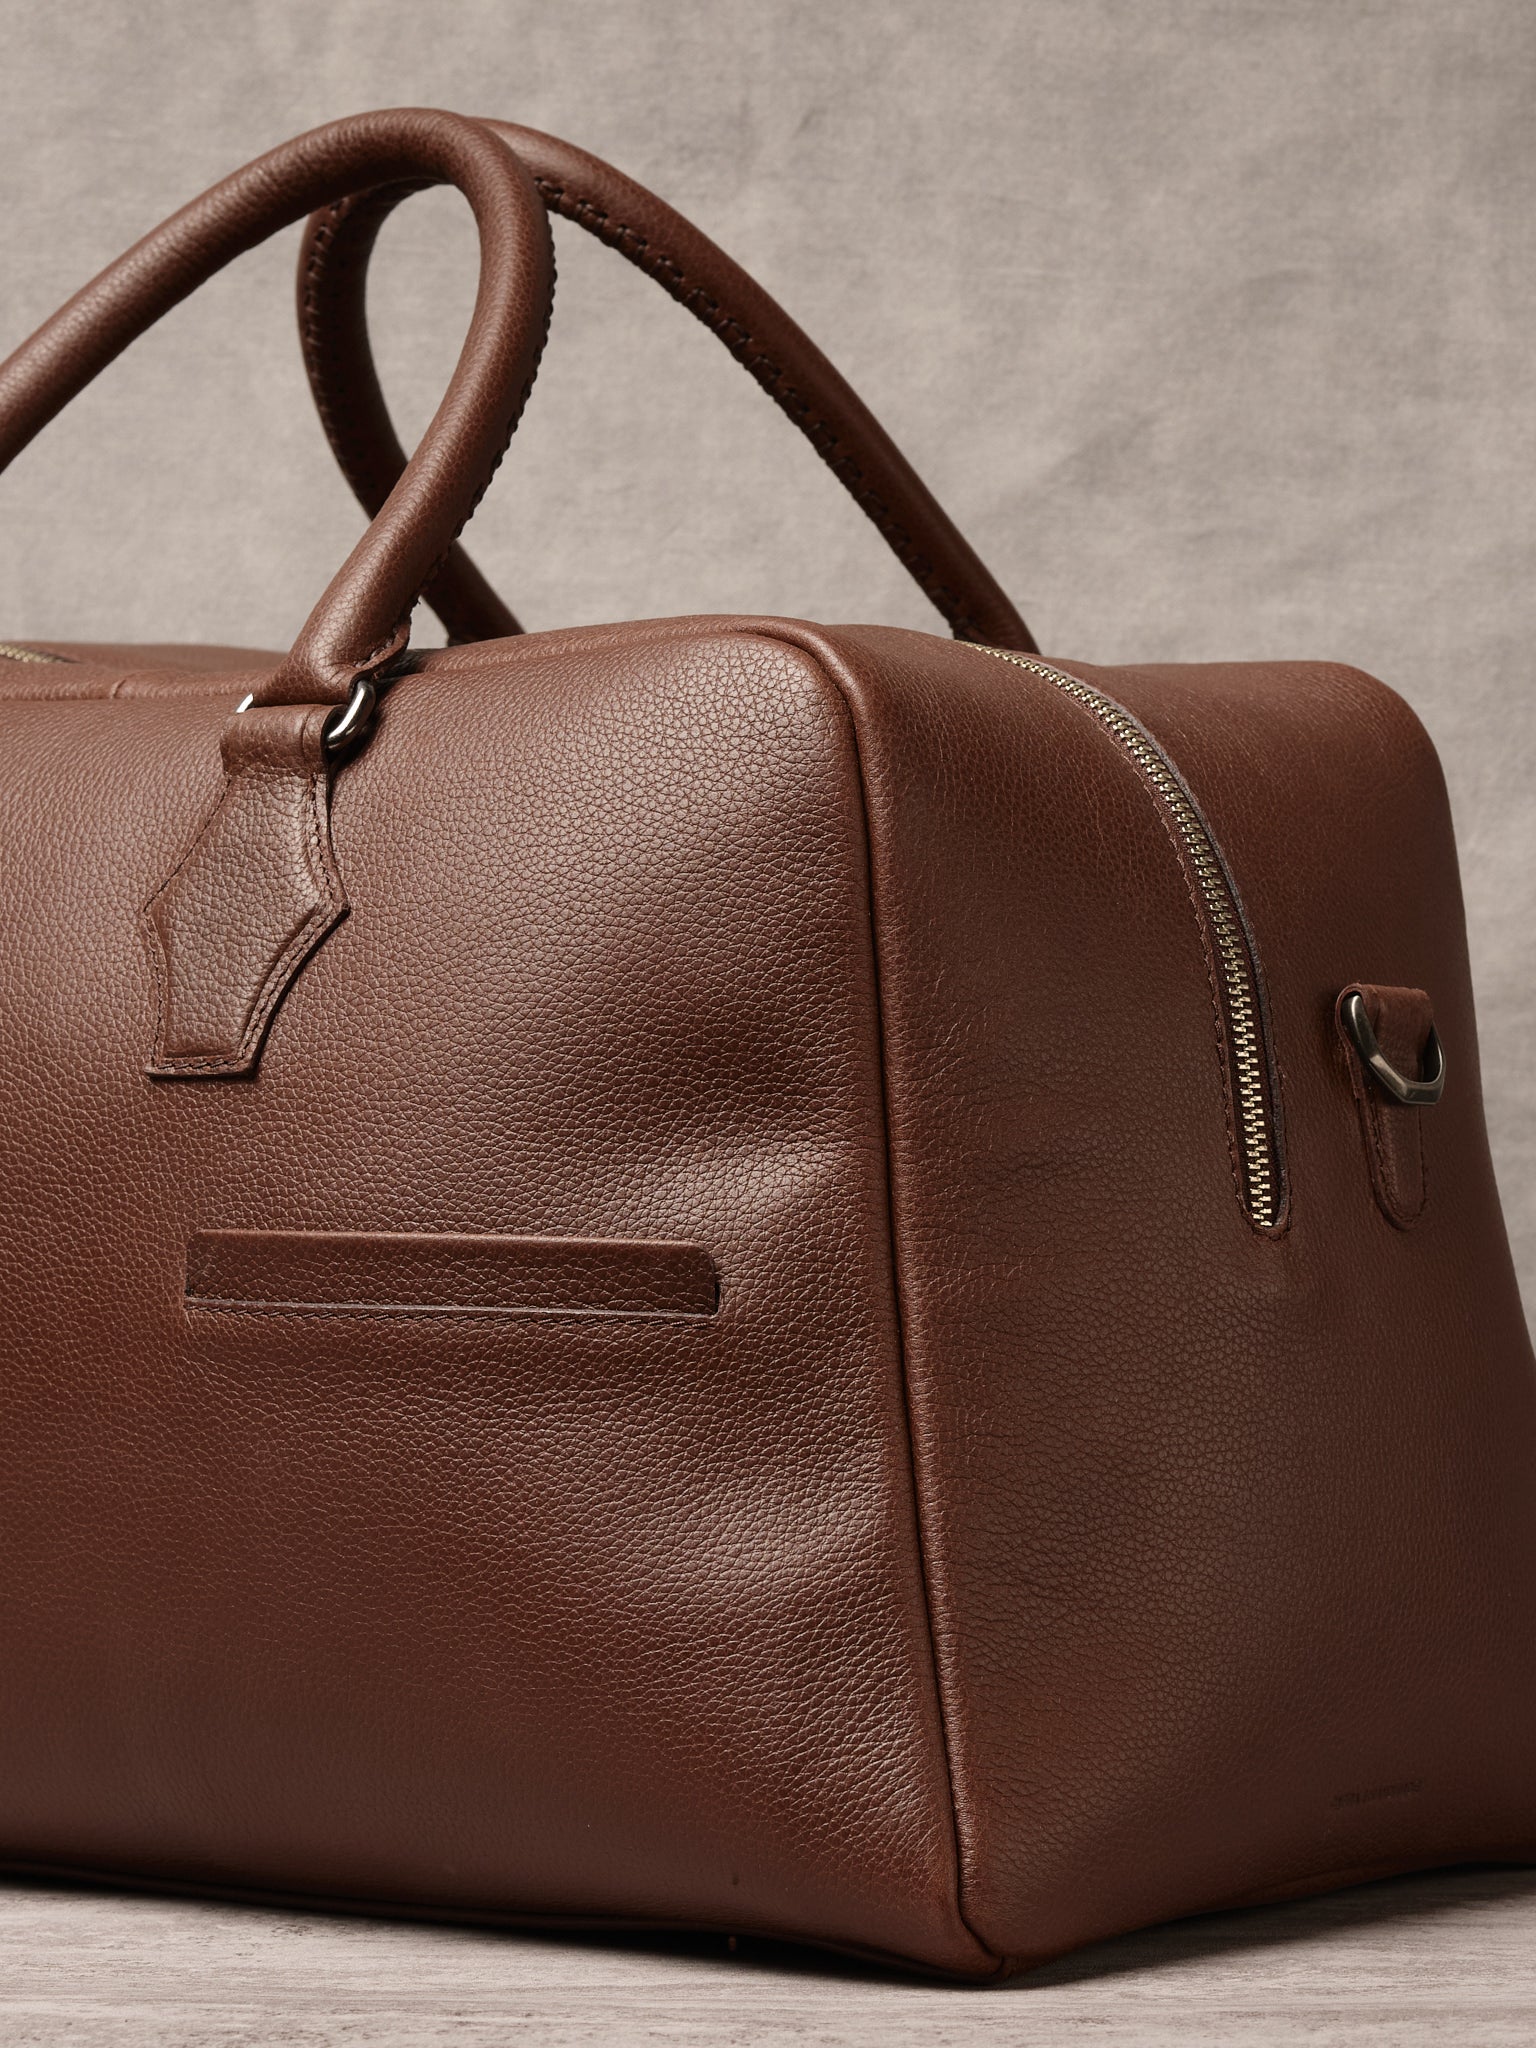 Easy Access Exterior Pocket. Weekender Duffle Bag Brown by Capra Leather